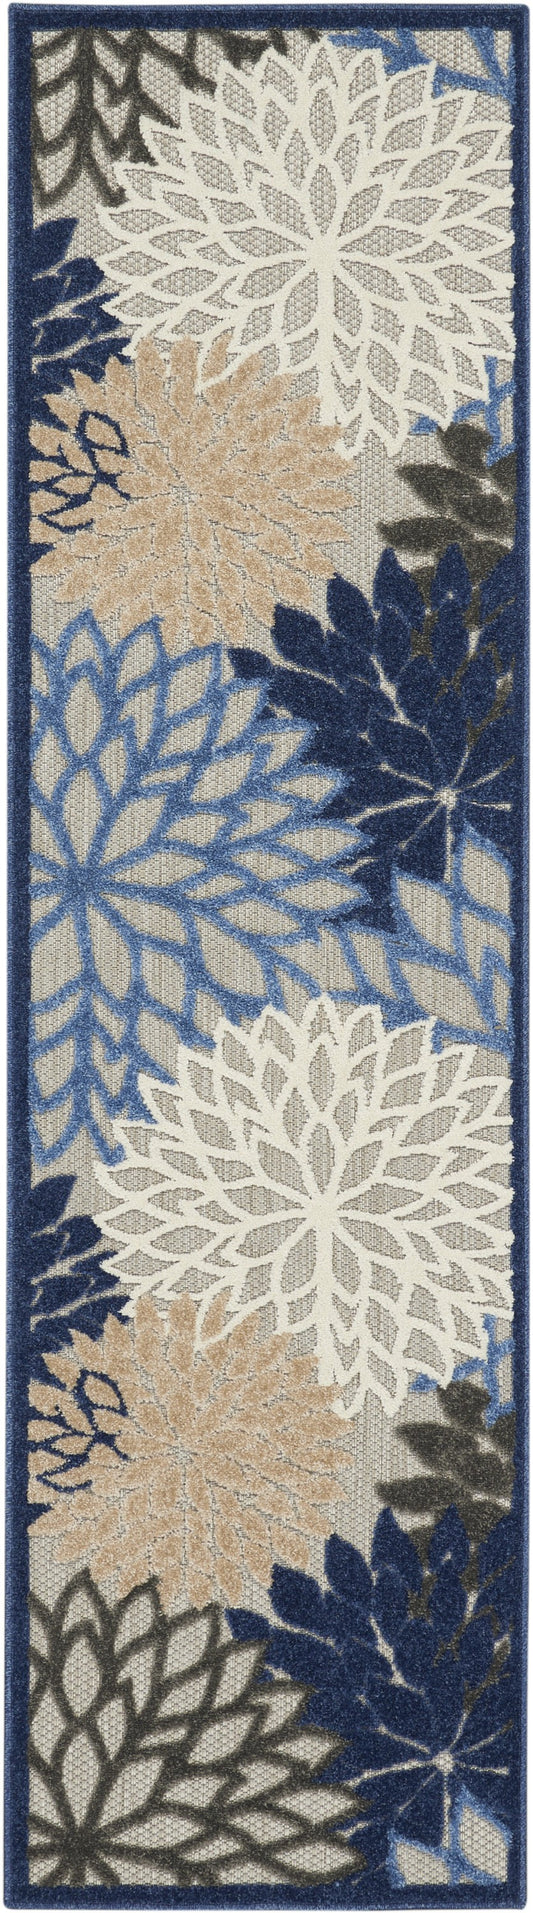 2' X 6' Blue And Gray Floral Indoor Outdoor Area Rug